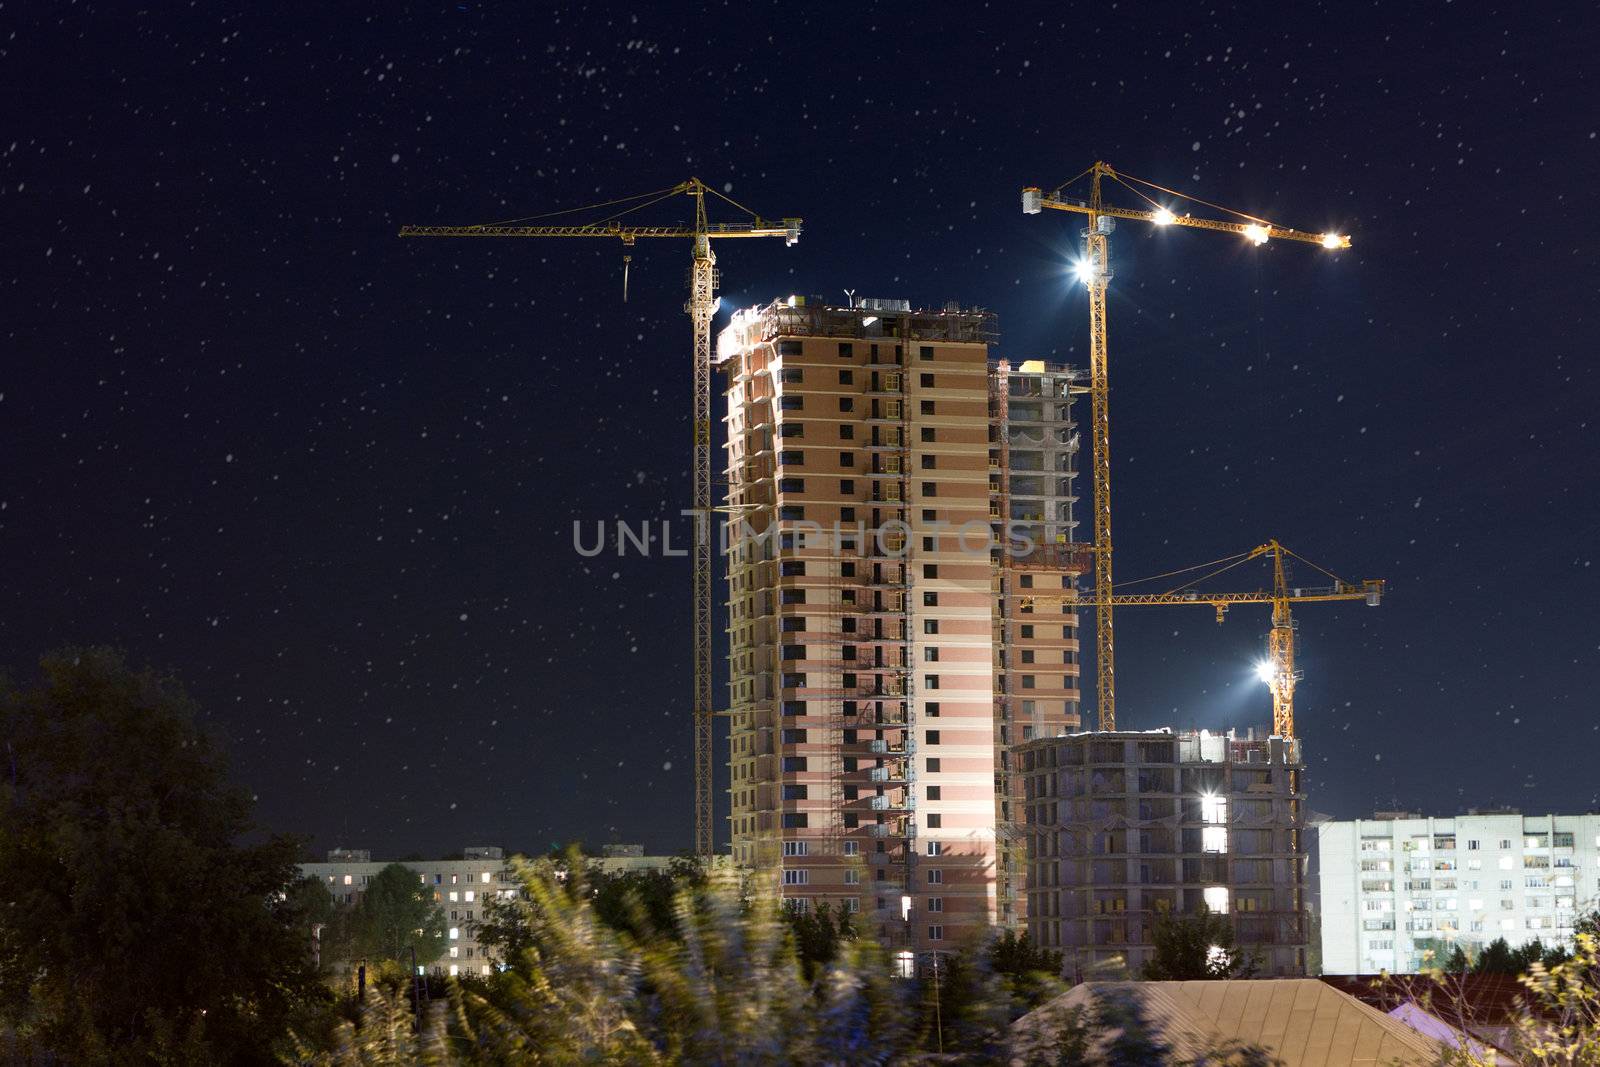 Construction Site at night with construction cranes.